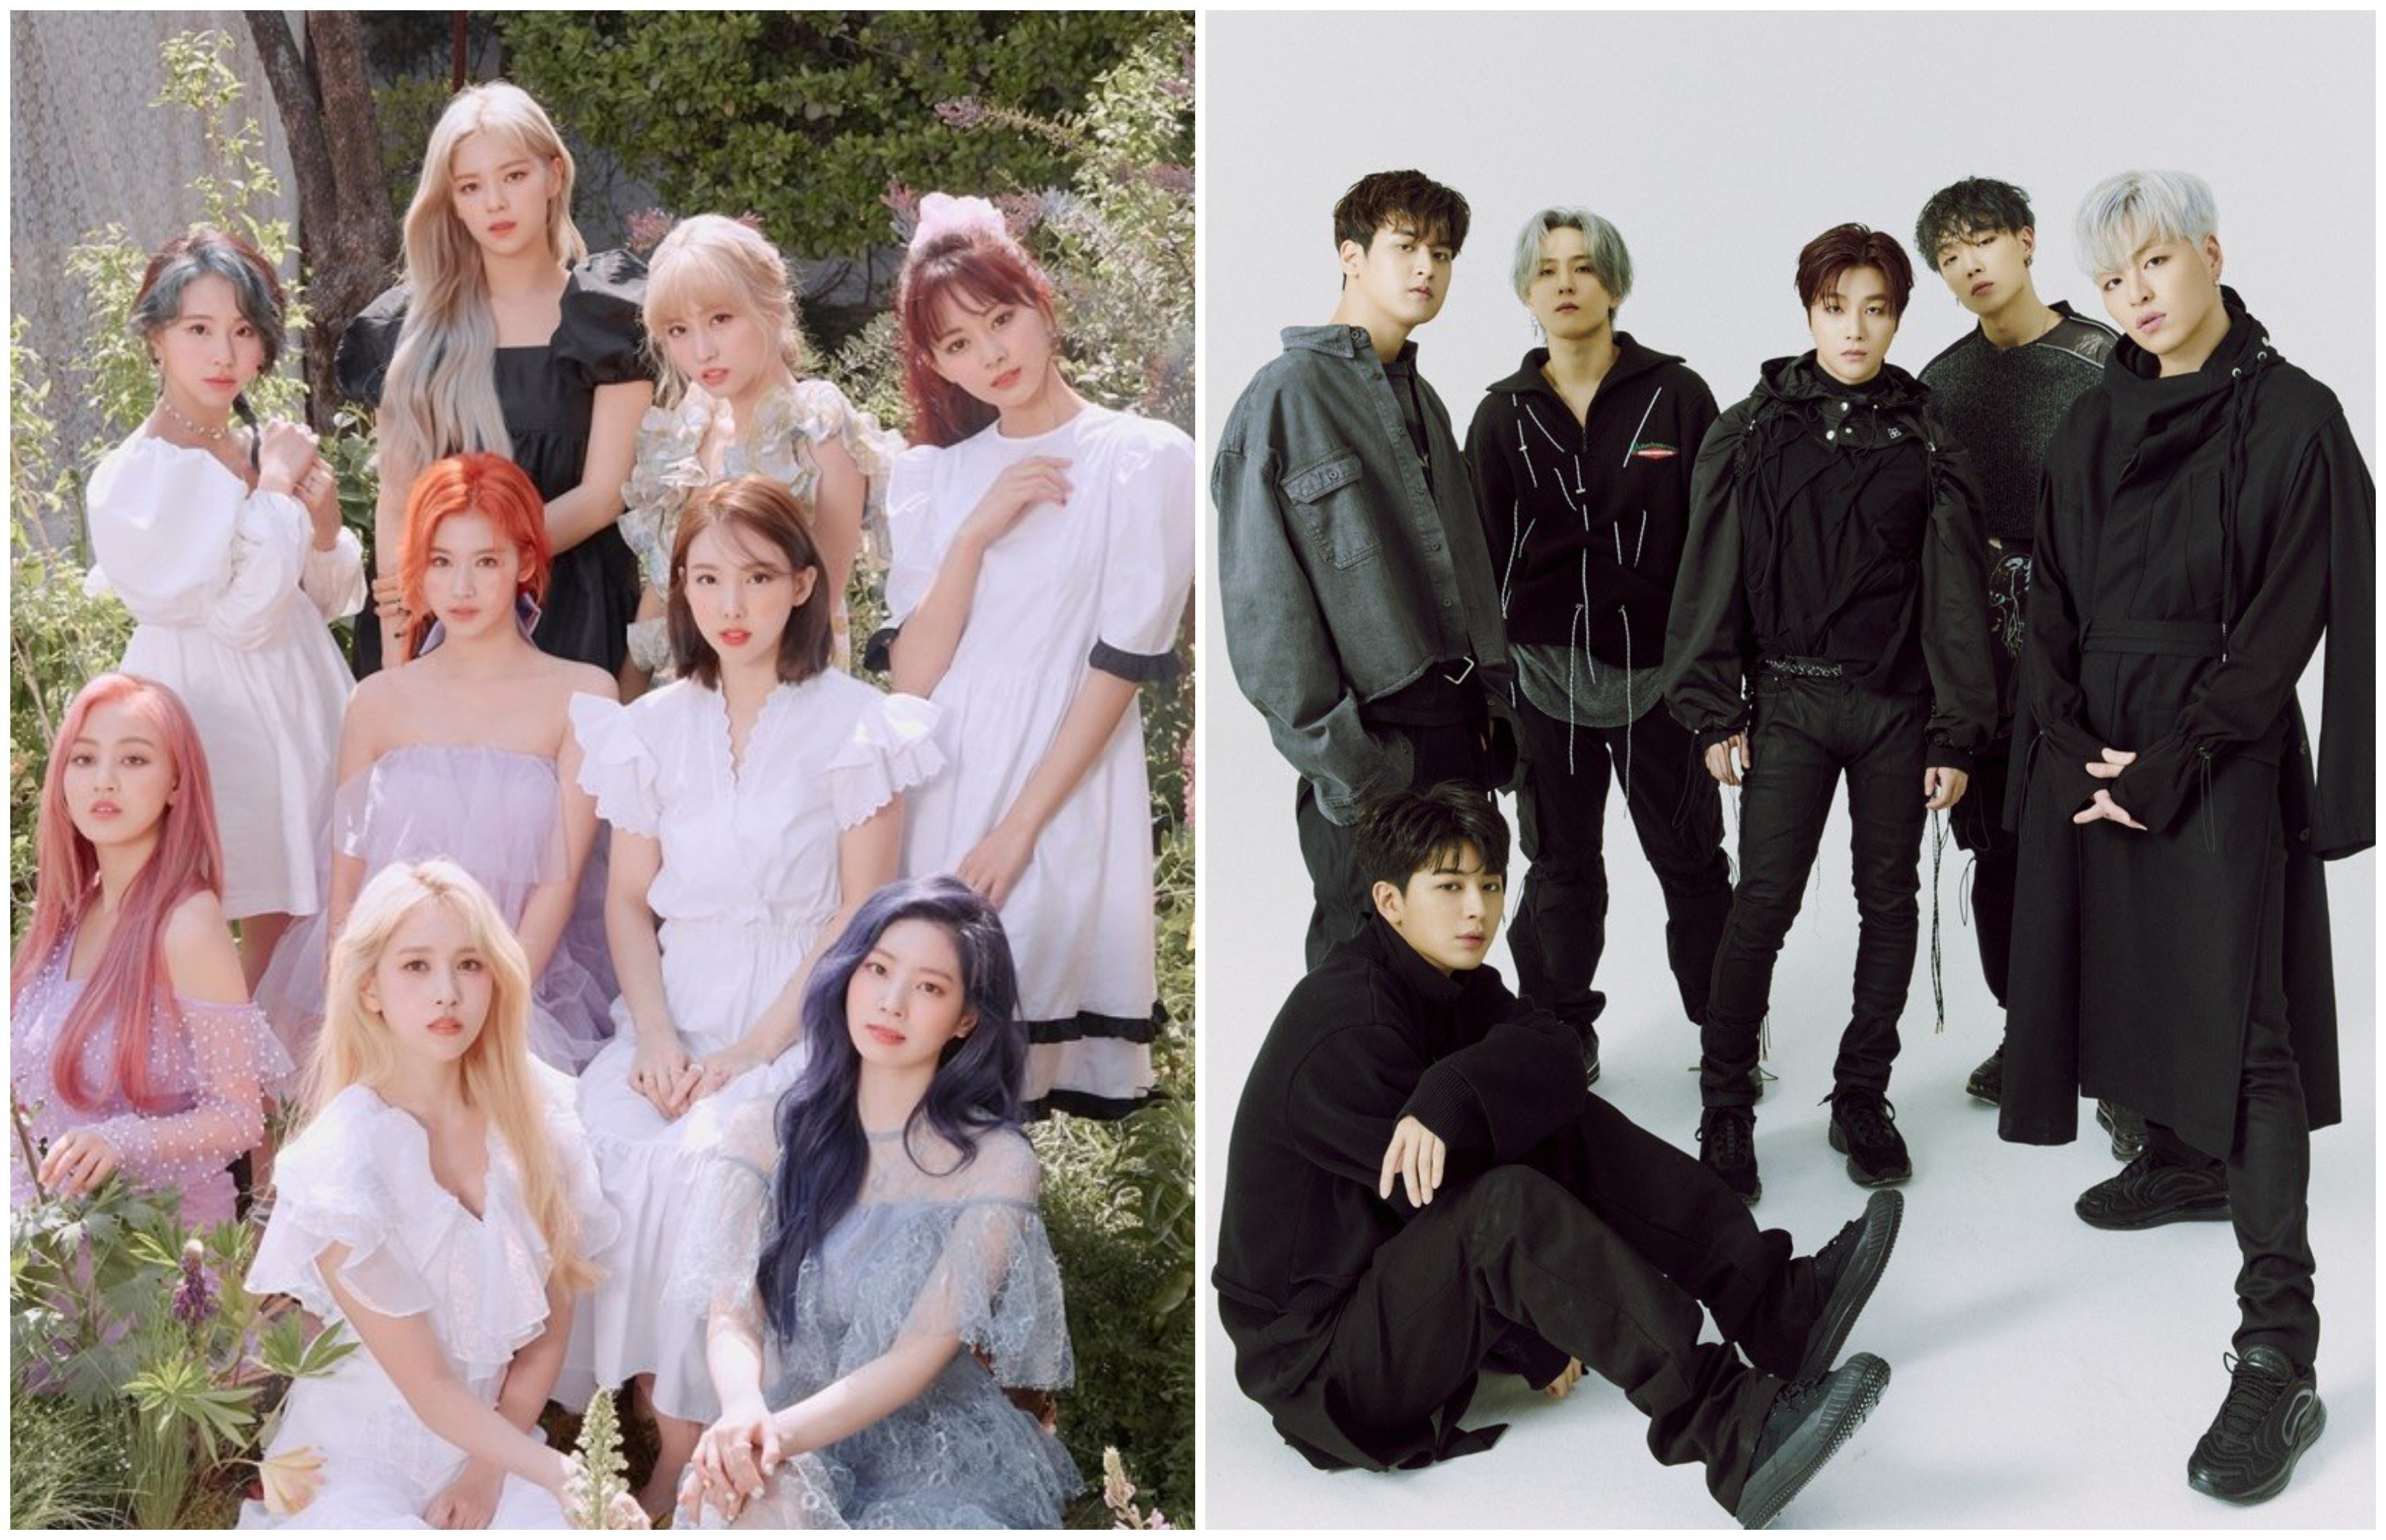 Twice’s future together is looking strong but iKon seems to be on rocky roads. Photos: JYP Entertainment, YG Entertainment